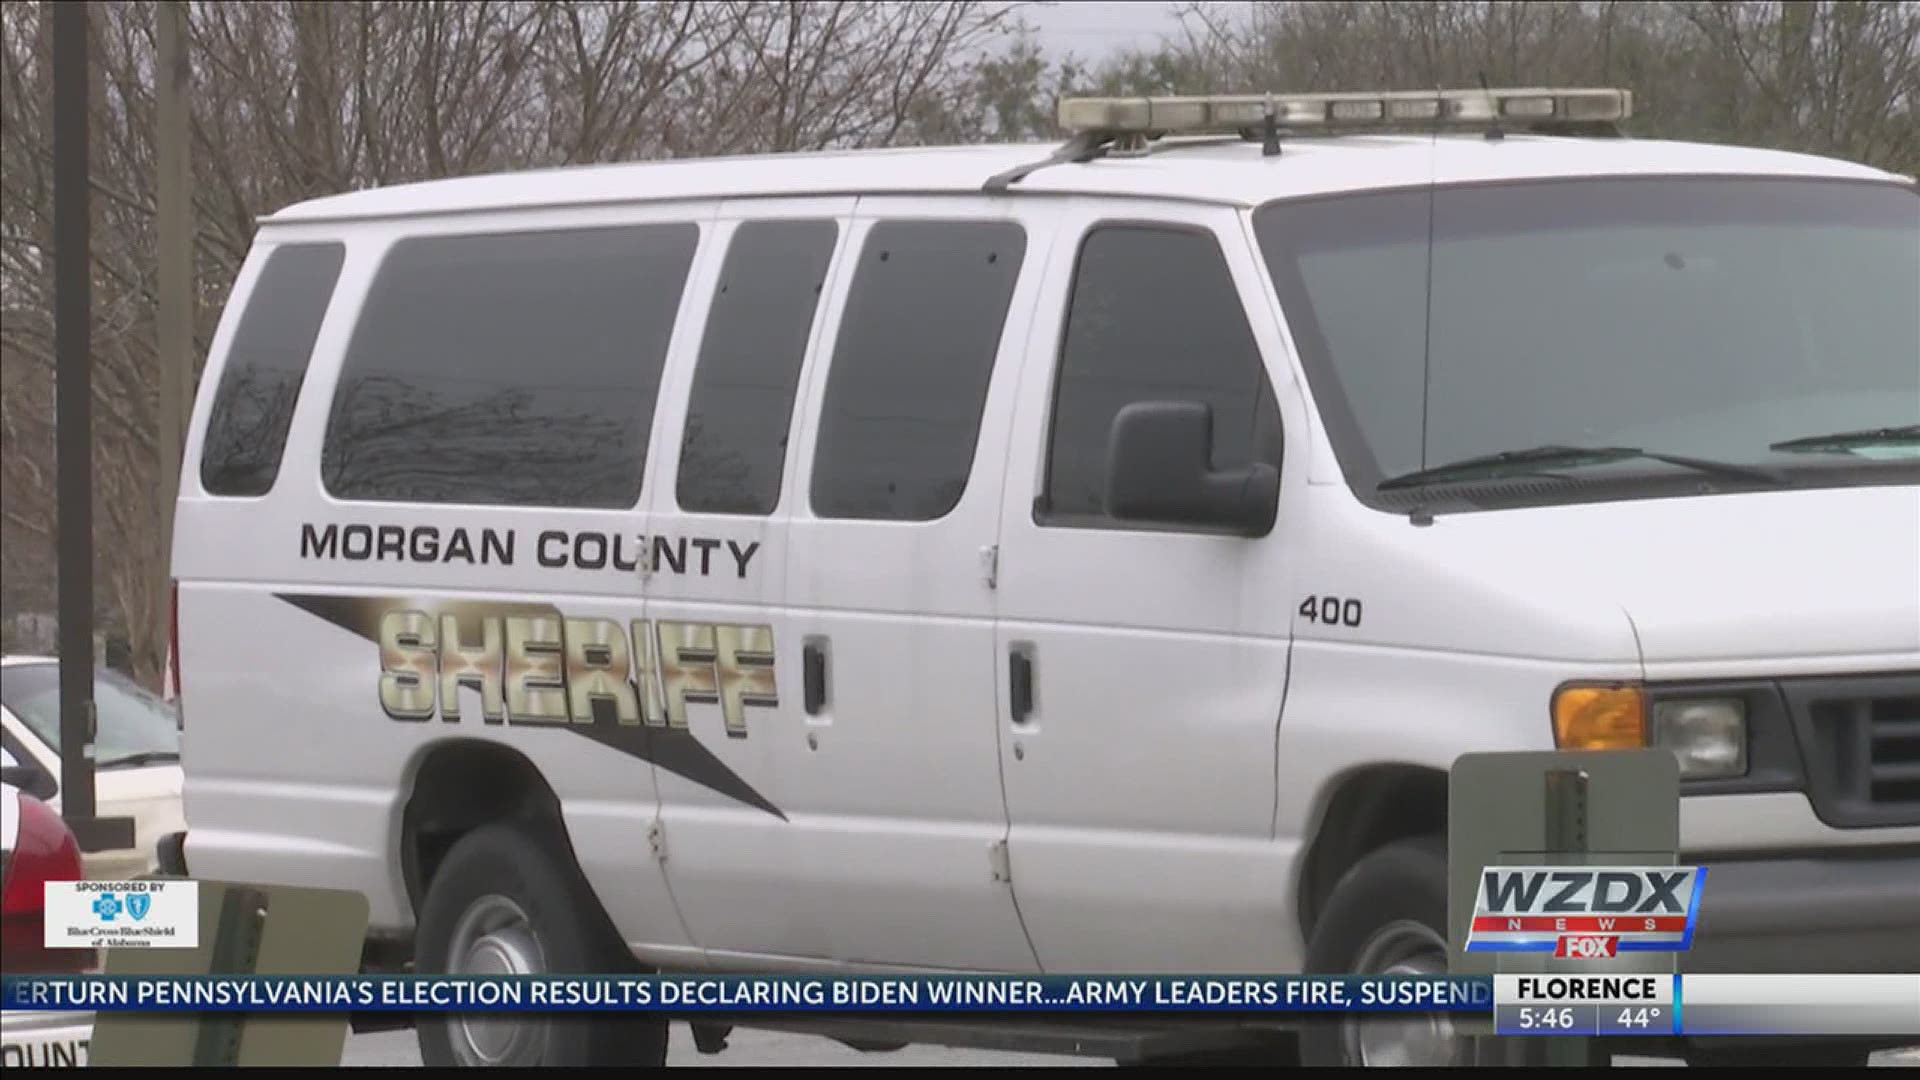 The Morgan County Sheriff's Office says scammers are calling people claiming they have won a Publishers Clearing House prize and asking for bank information.